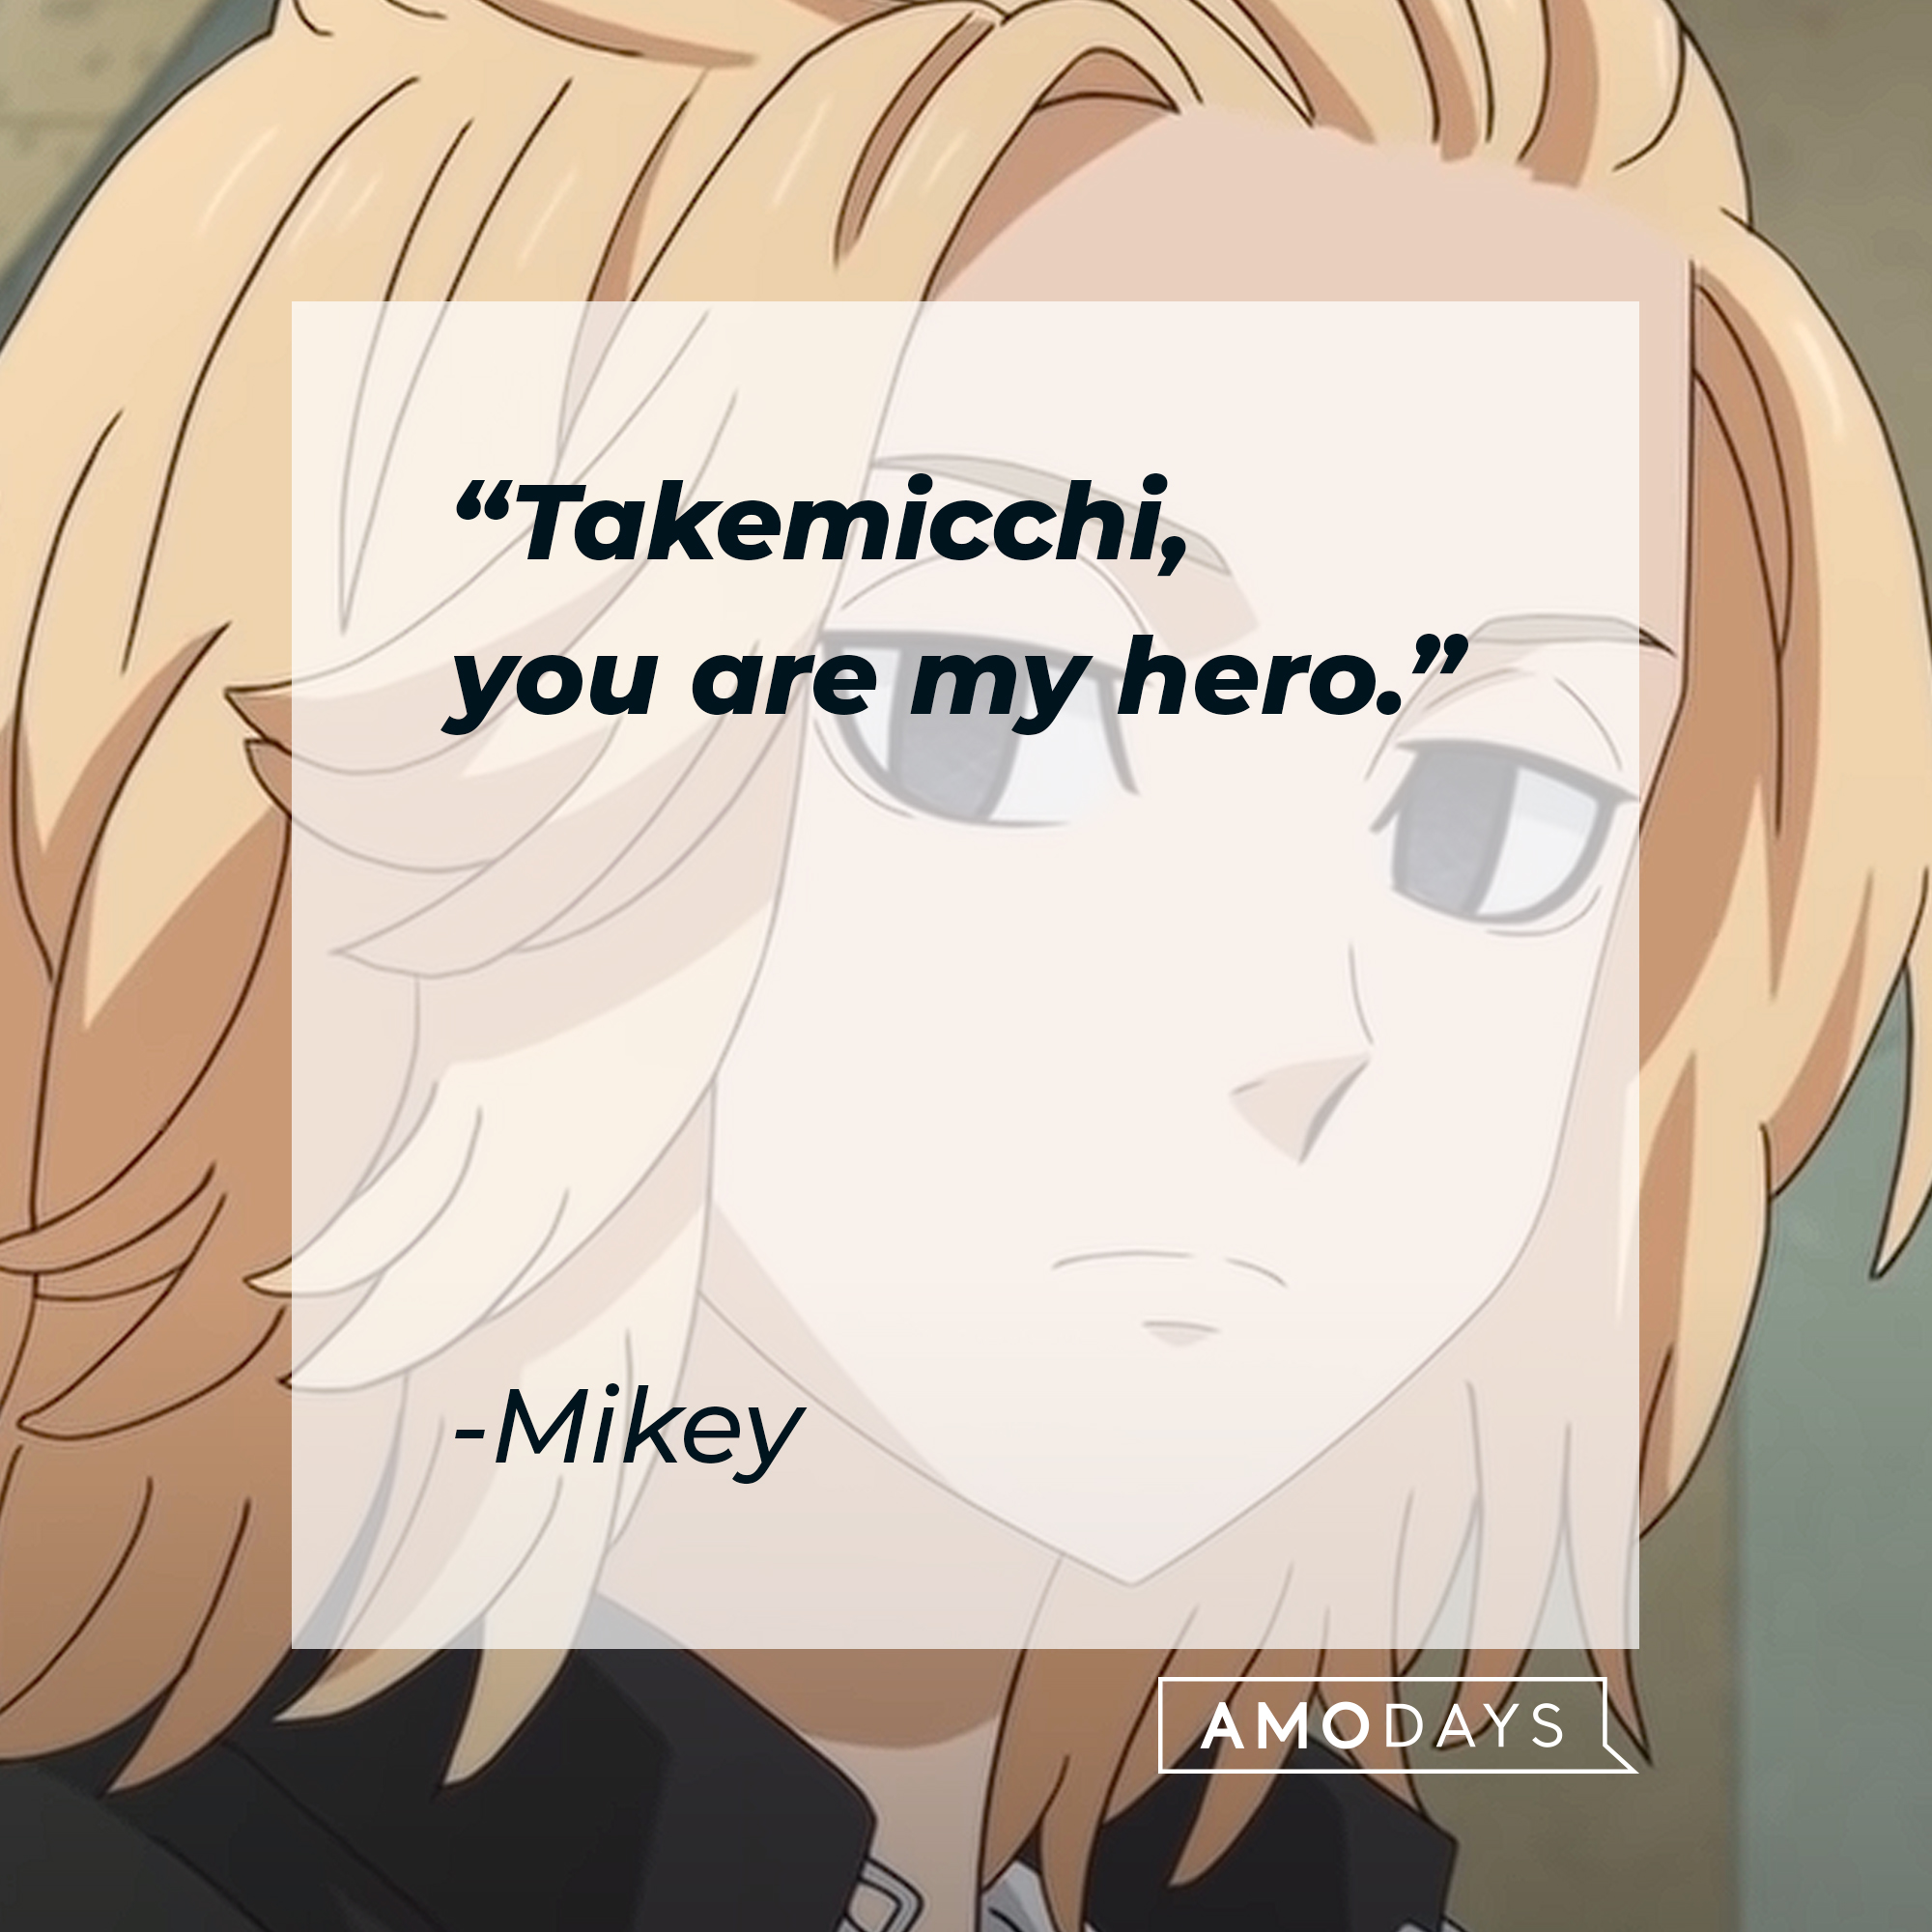 An image of Mikey with his quote: "Takemicchi, you are my hero.” | Source: youtube.com/CrunchyrollCollection